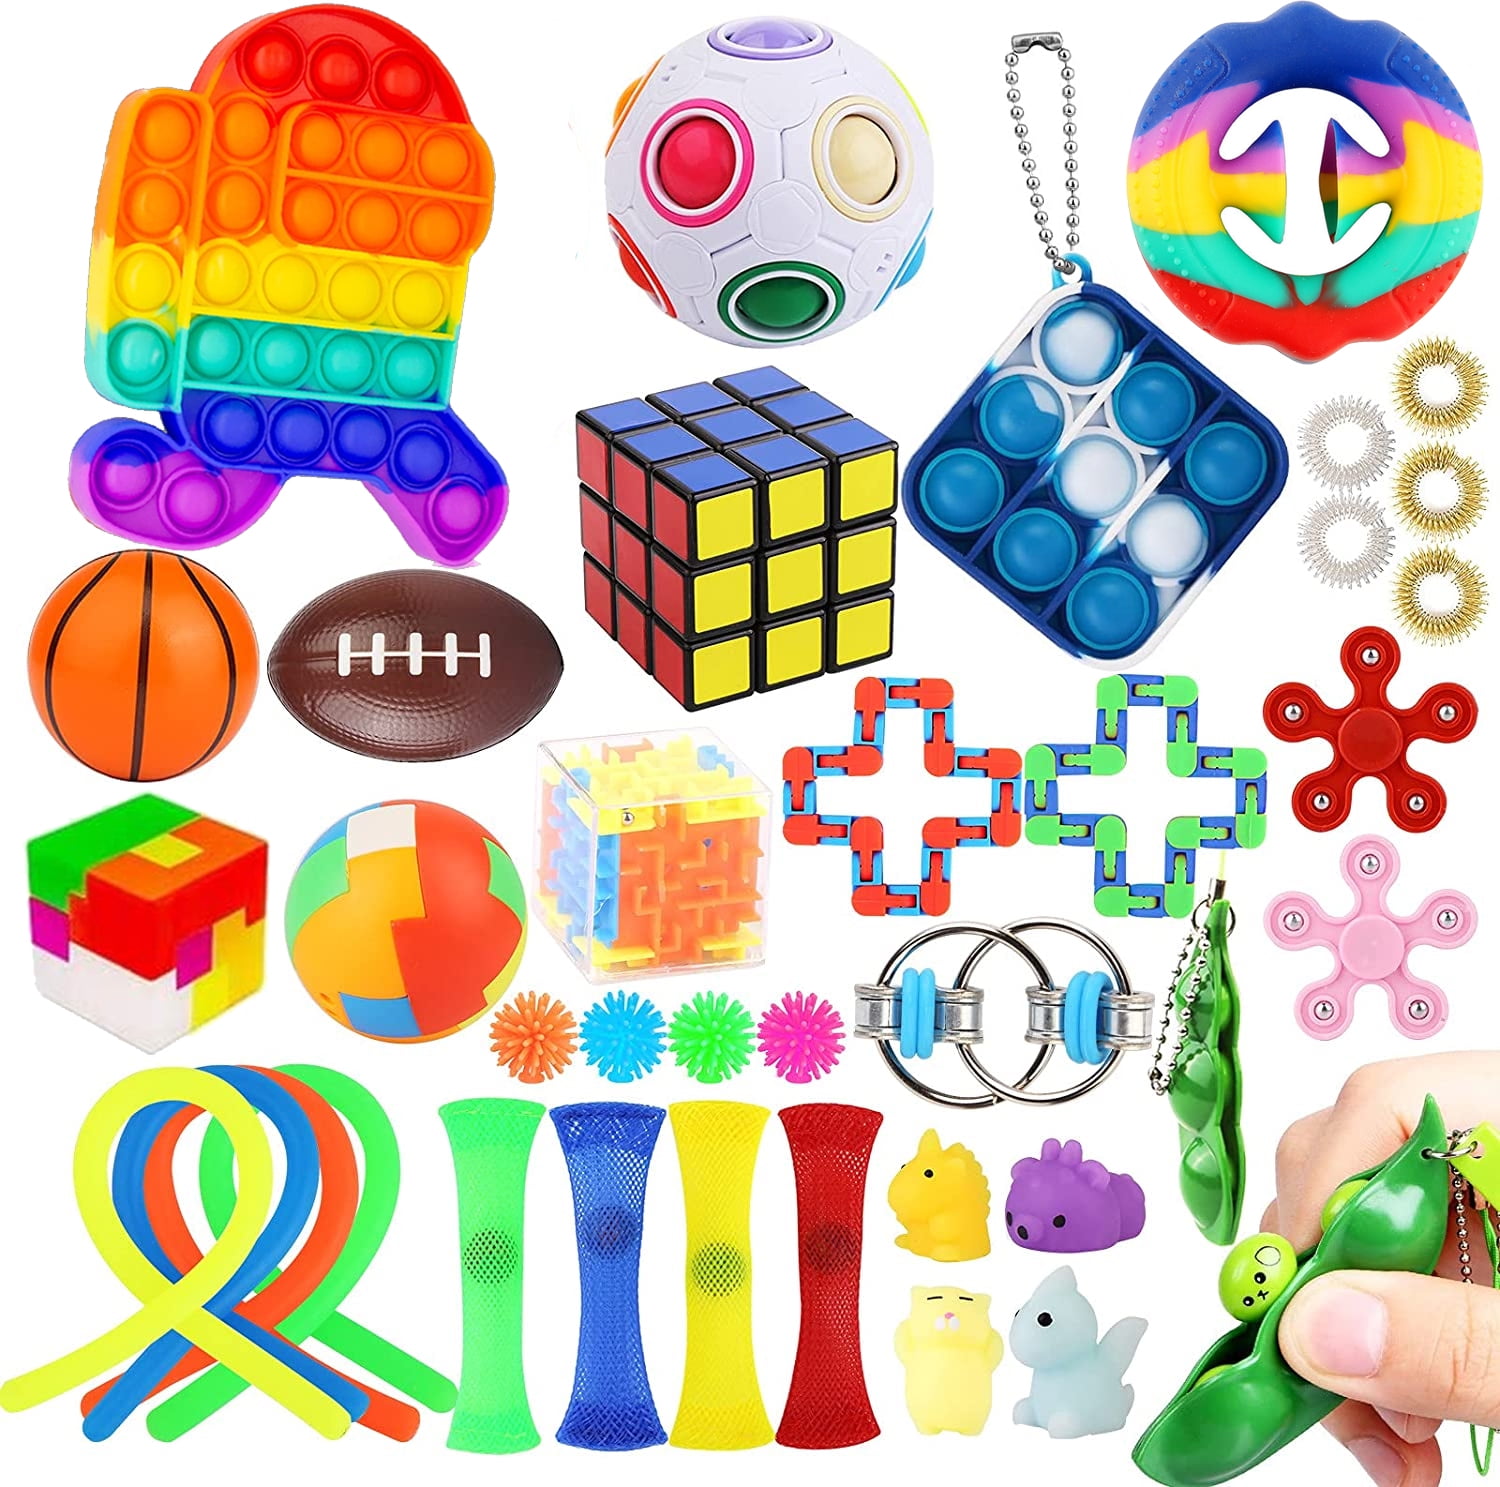 Special Education Fidget Toys Gadget For Kids Adult Help ADHD ADD OCD Autism LD 